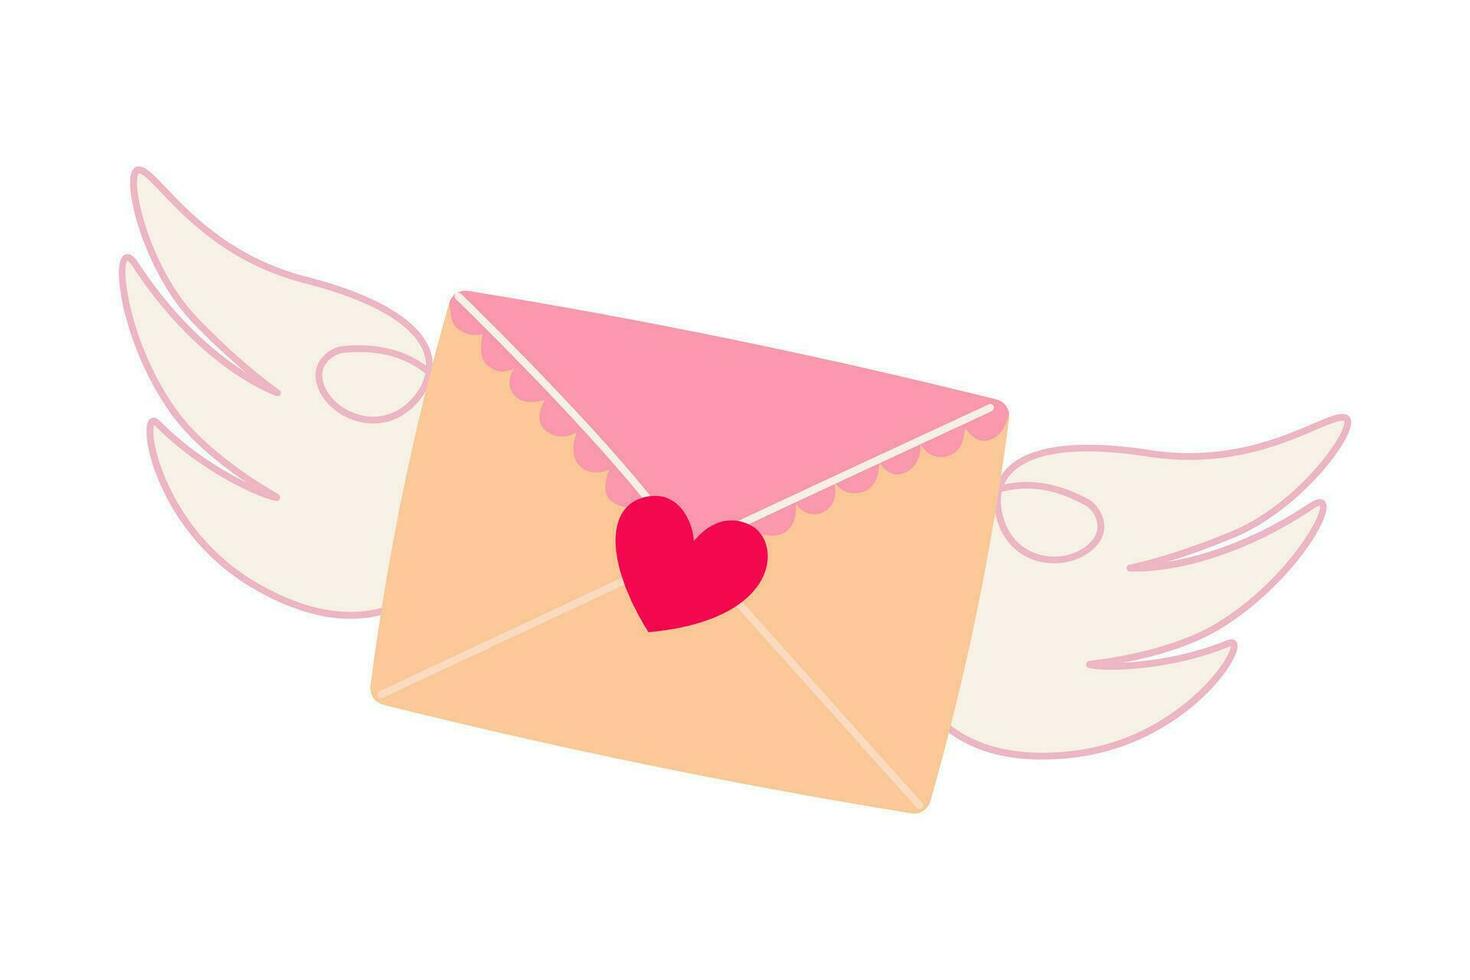 Love letter envelope with heart and wings. Confession and love message letter for Valentine's day. Vector illustration on white background. Detailed cartoon element for holiday patterns, designs